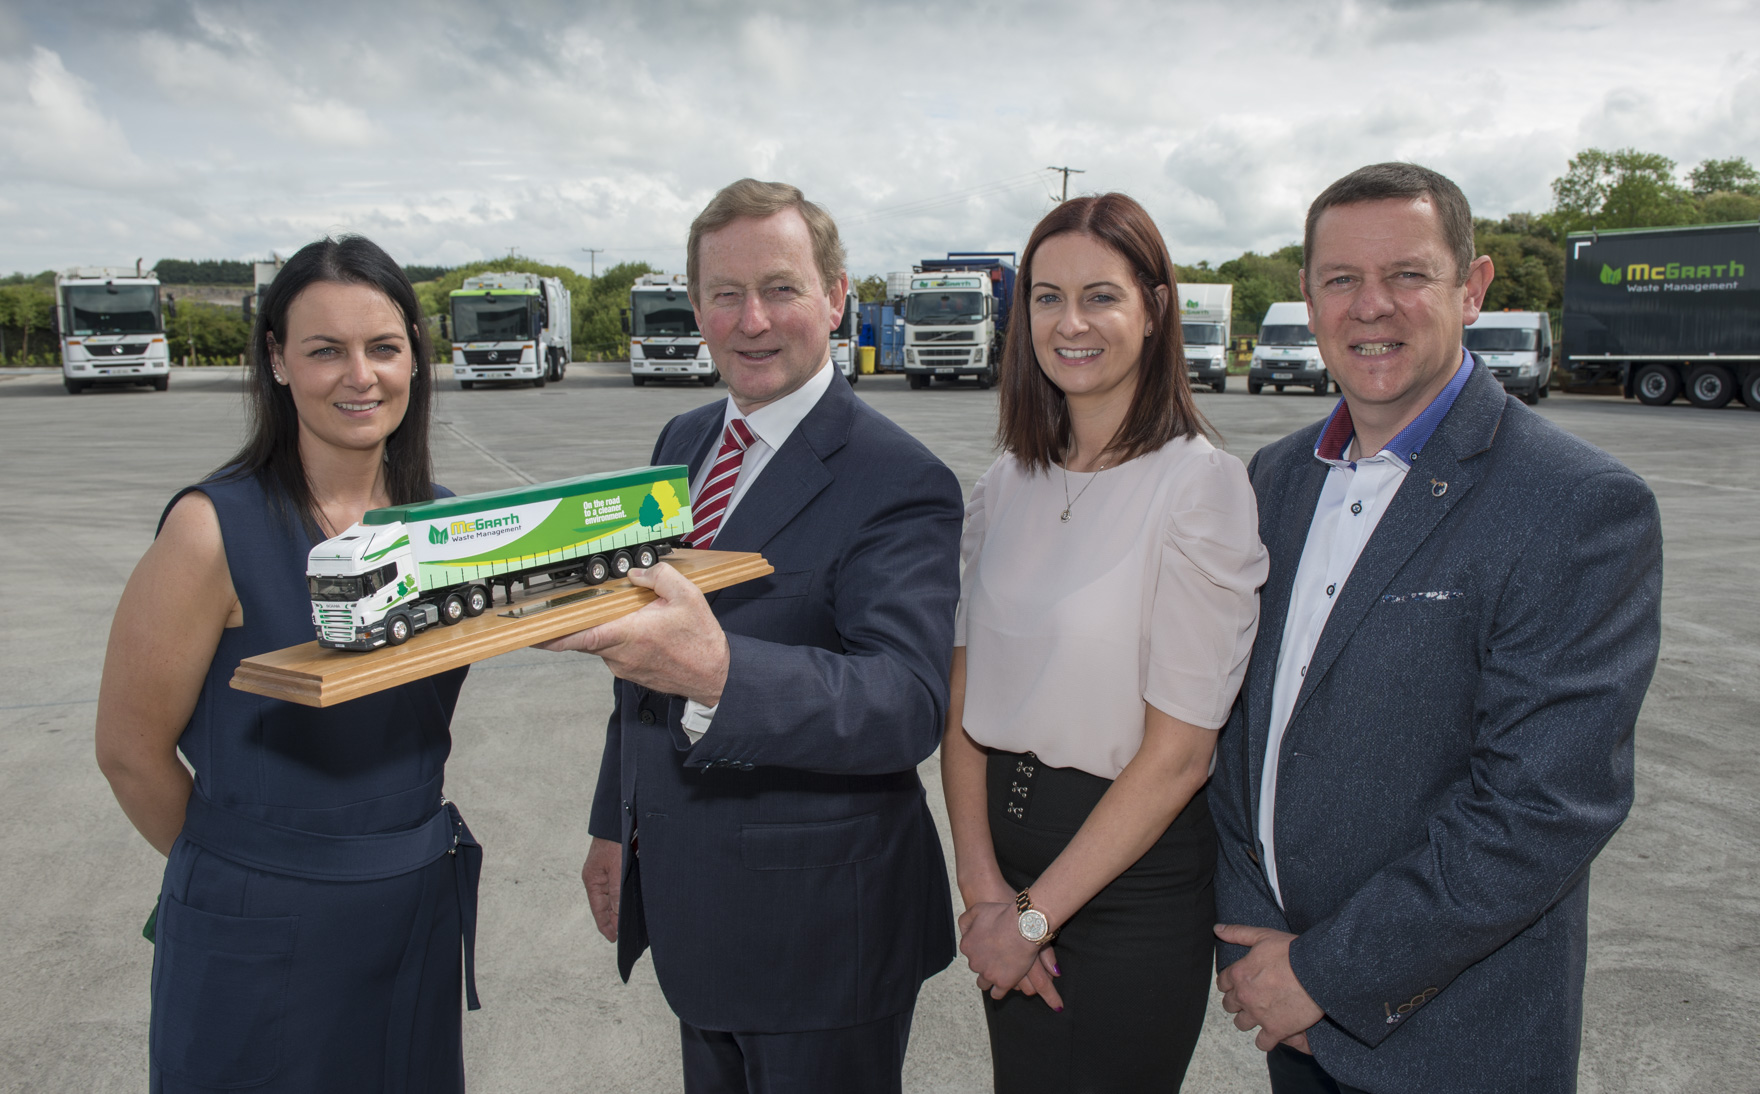 McGrath Waste welcomes Enda Kenny to official launch of €2.5million Mayo facility